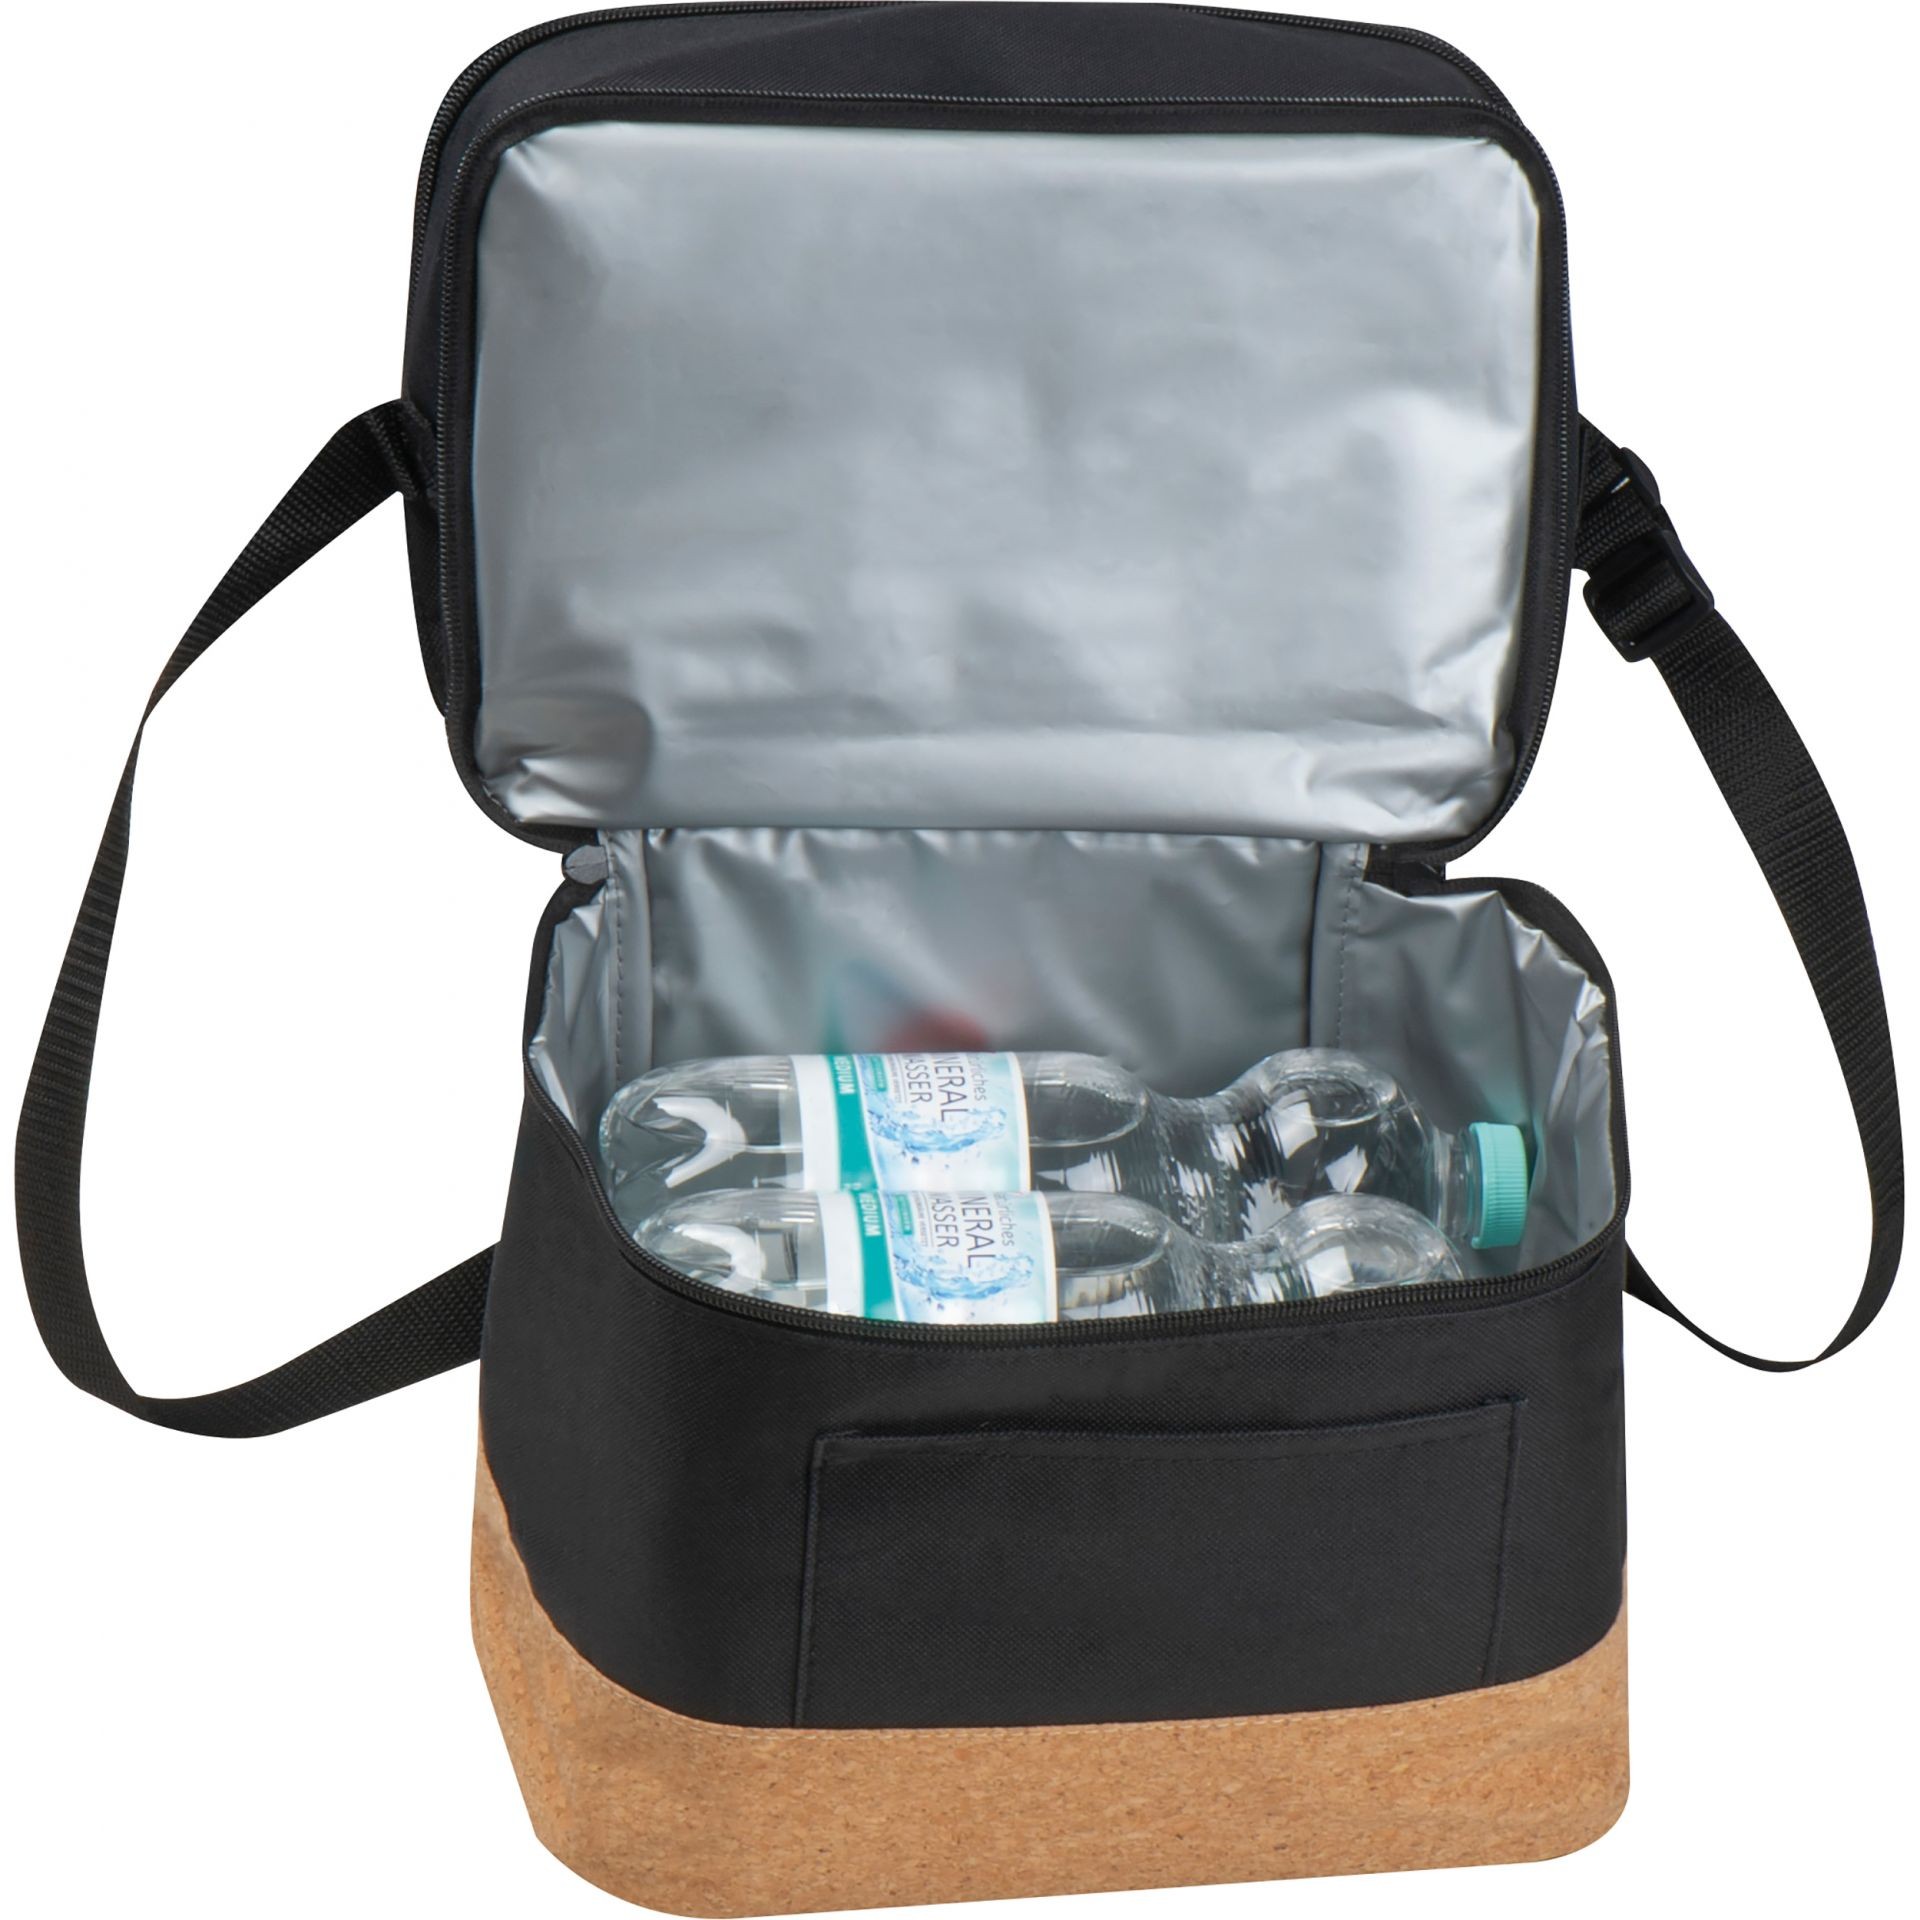 RPET cooler bag with extra compartment and cork bottom